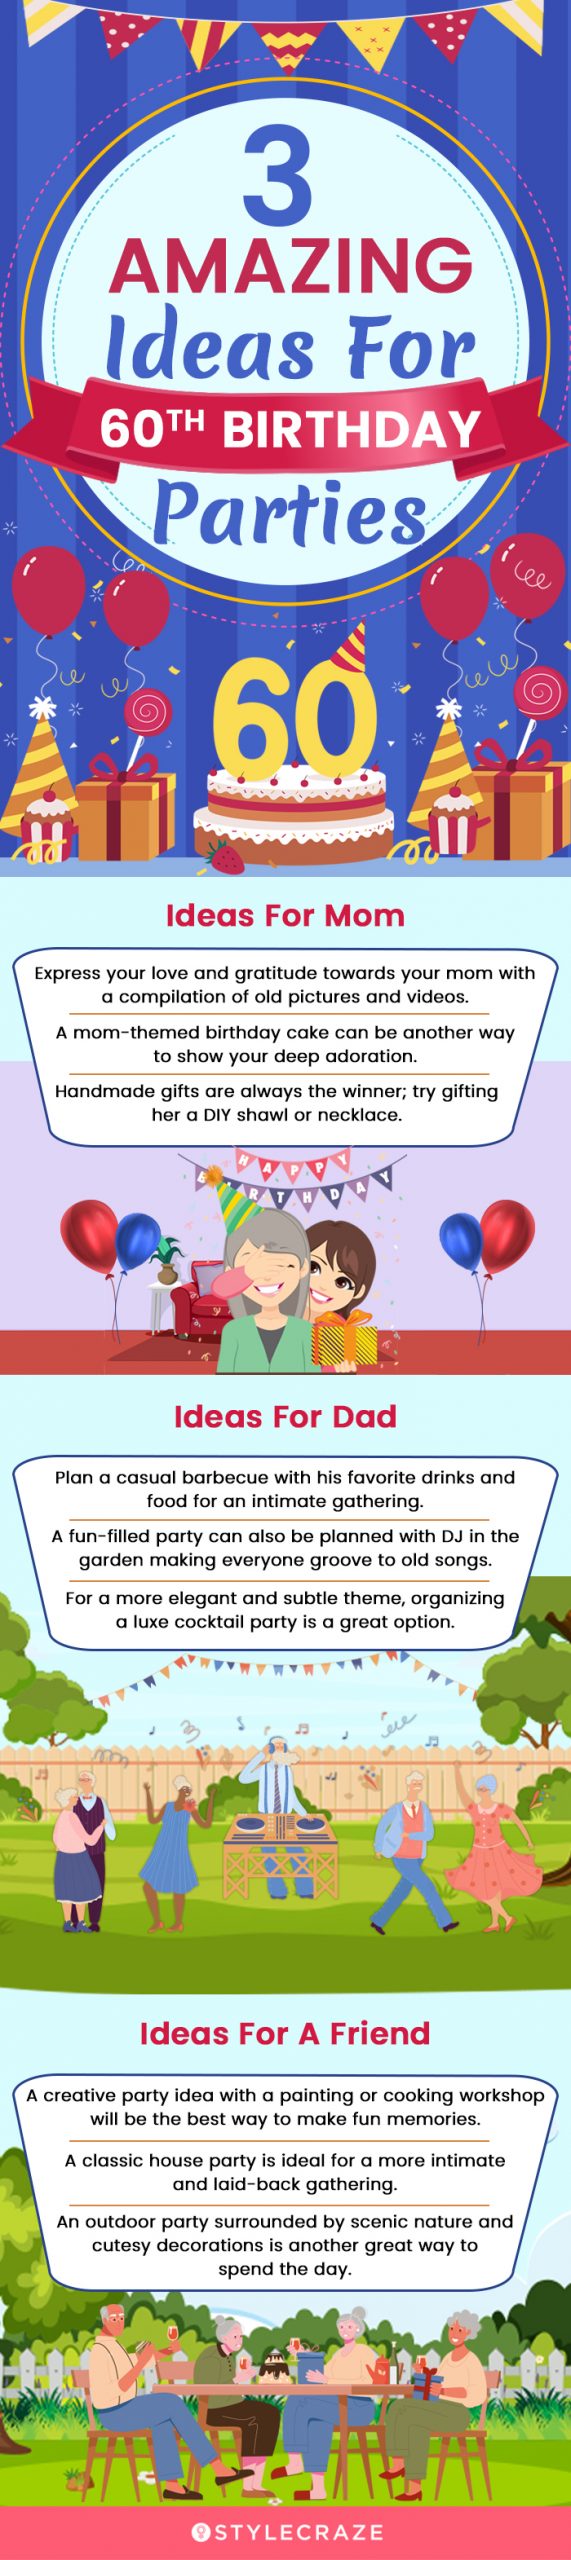 3 amazing ideas for 60th birthday parties (infographic)